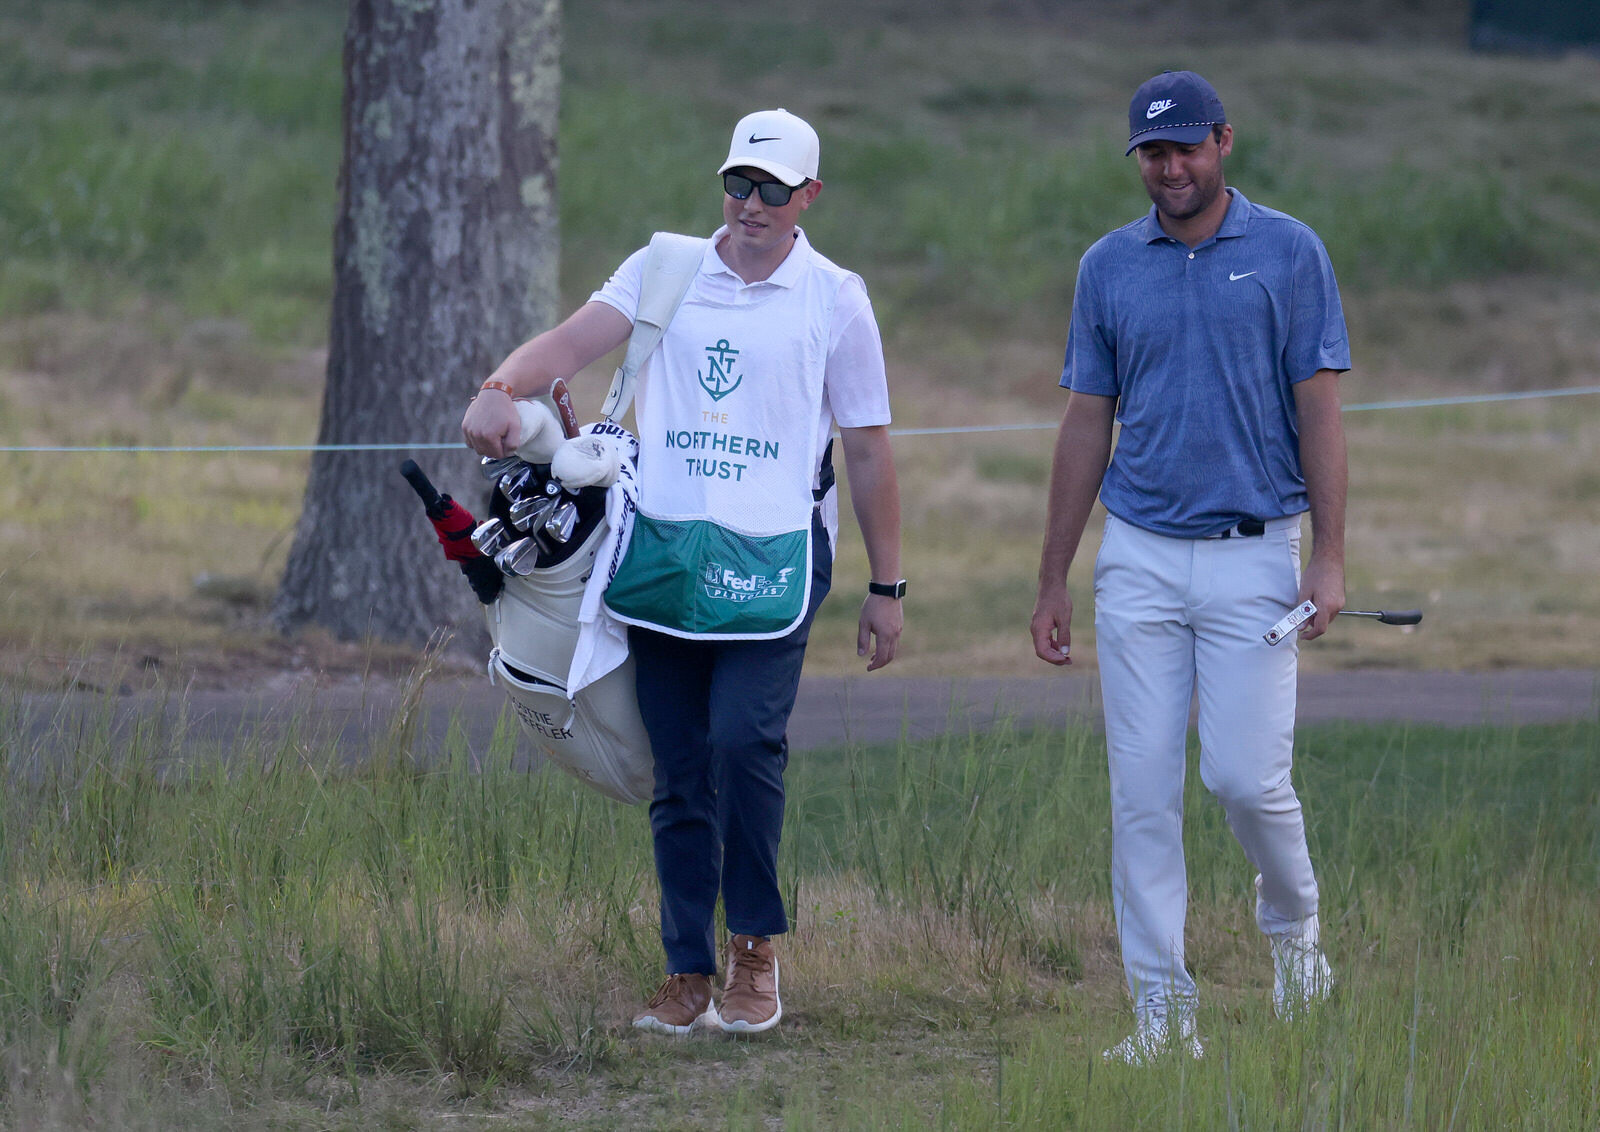  NORTON, MASSACHUSETTS - AUGUST 23: Eric Ledbetter, an assistant pro at TPC Boston, walks to the 16th green as he caddies for Scottie Scheffler of the United States during the final round of The Northern Trust at TPC Boston on August 23, 2020 in Nort